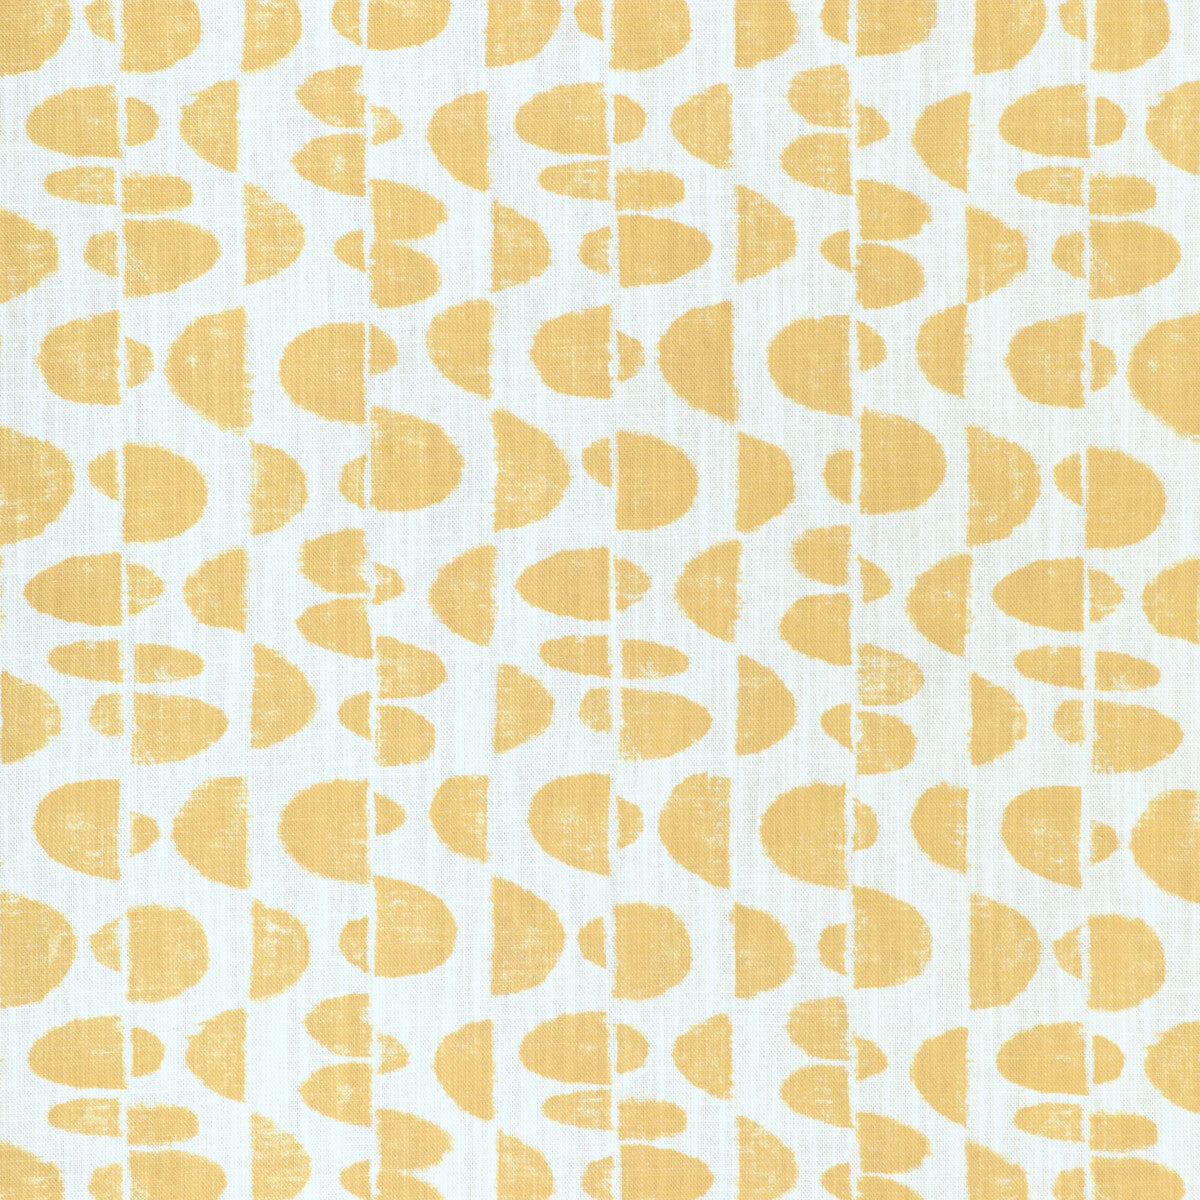 Moon Phase fabric in citrus color - pattern MOON PHASE.40.0 - by Kravet Basics in the Small Scale Prints collection